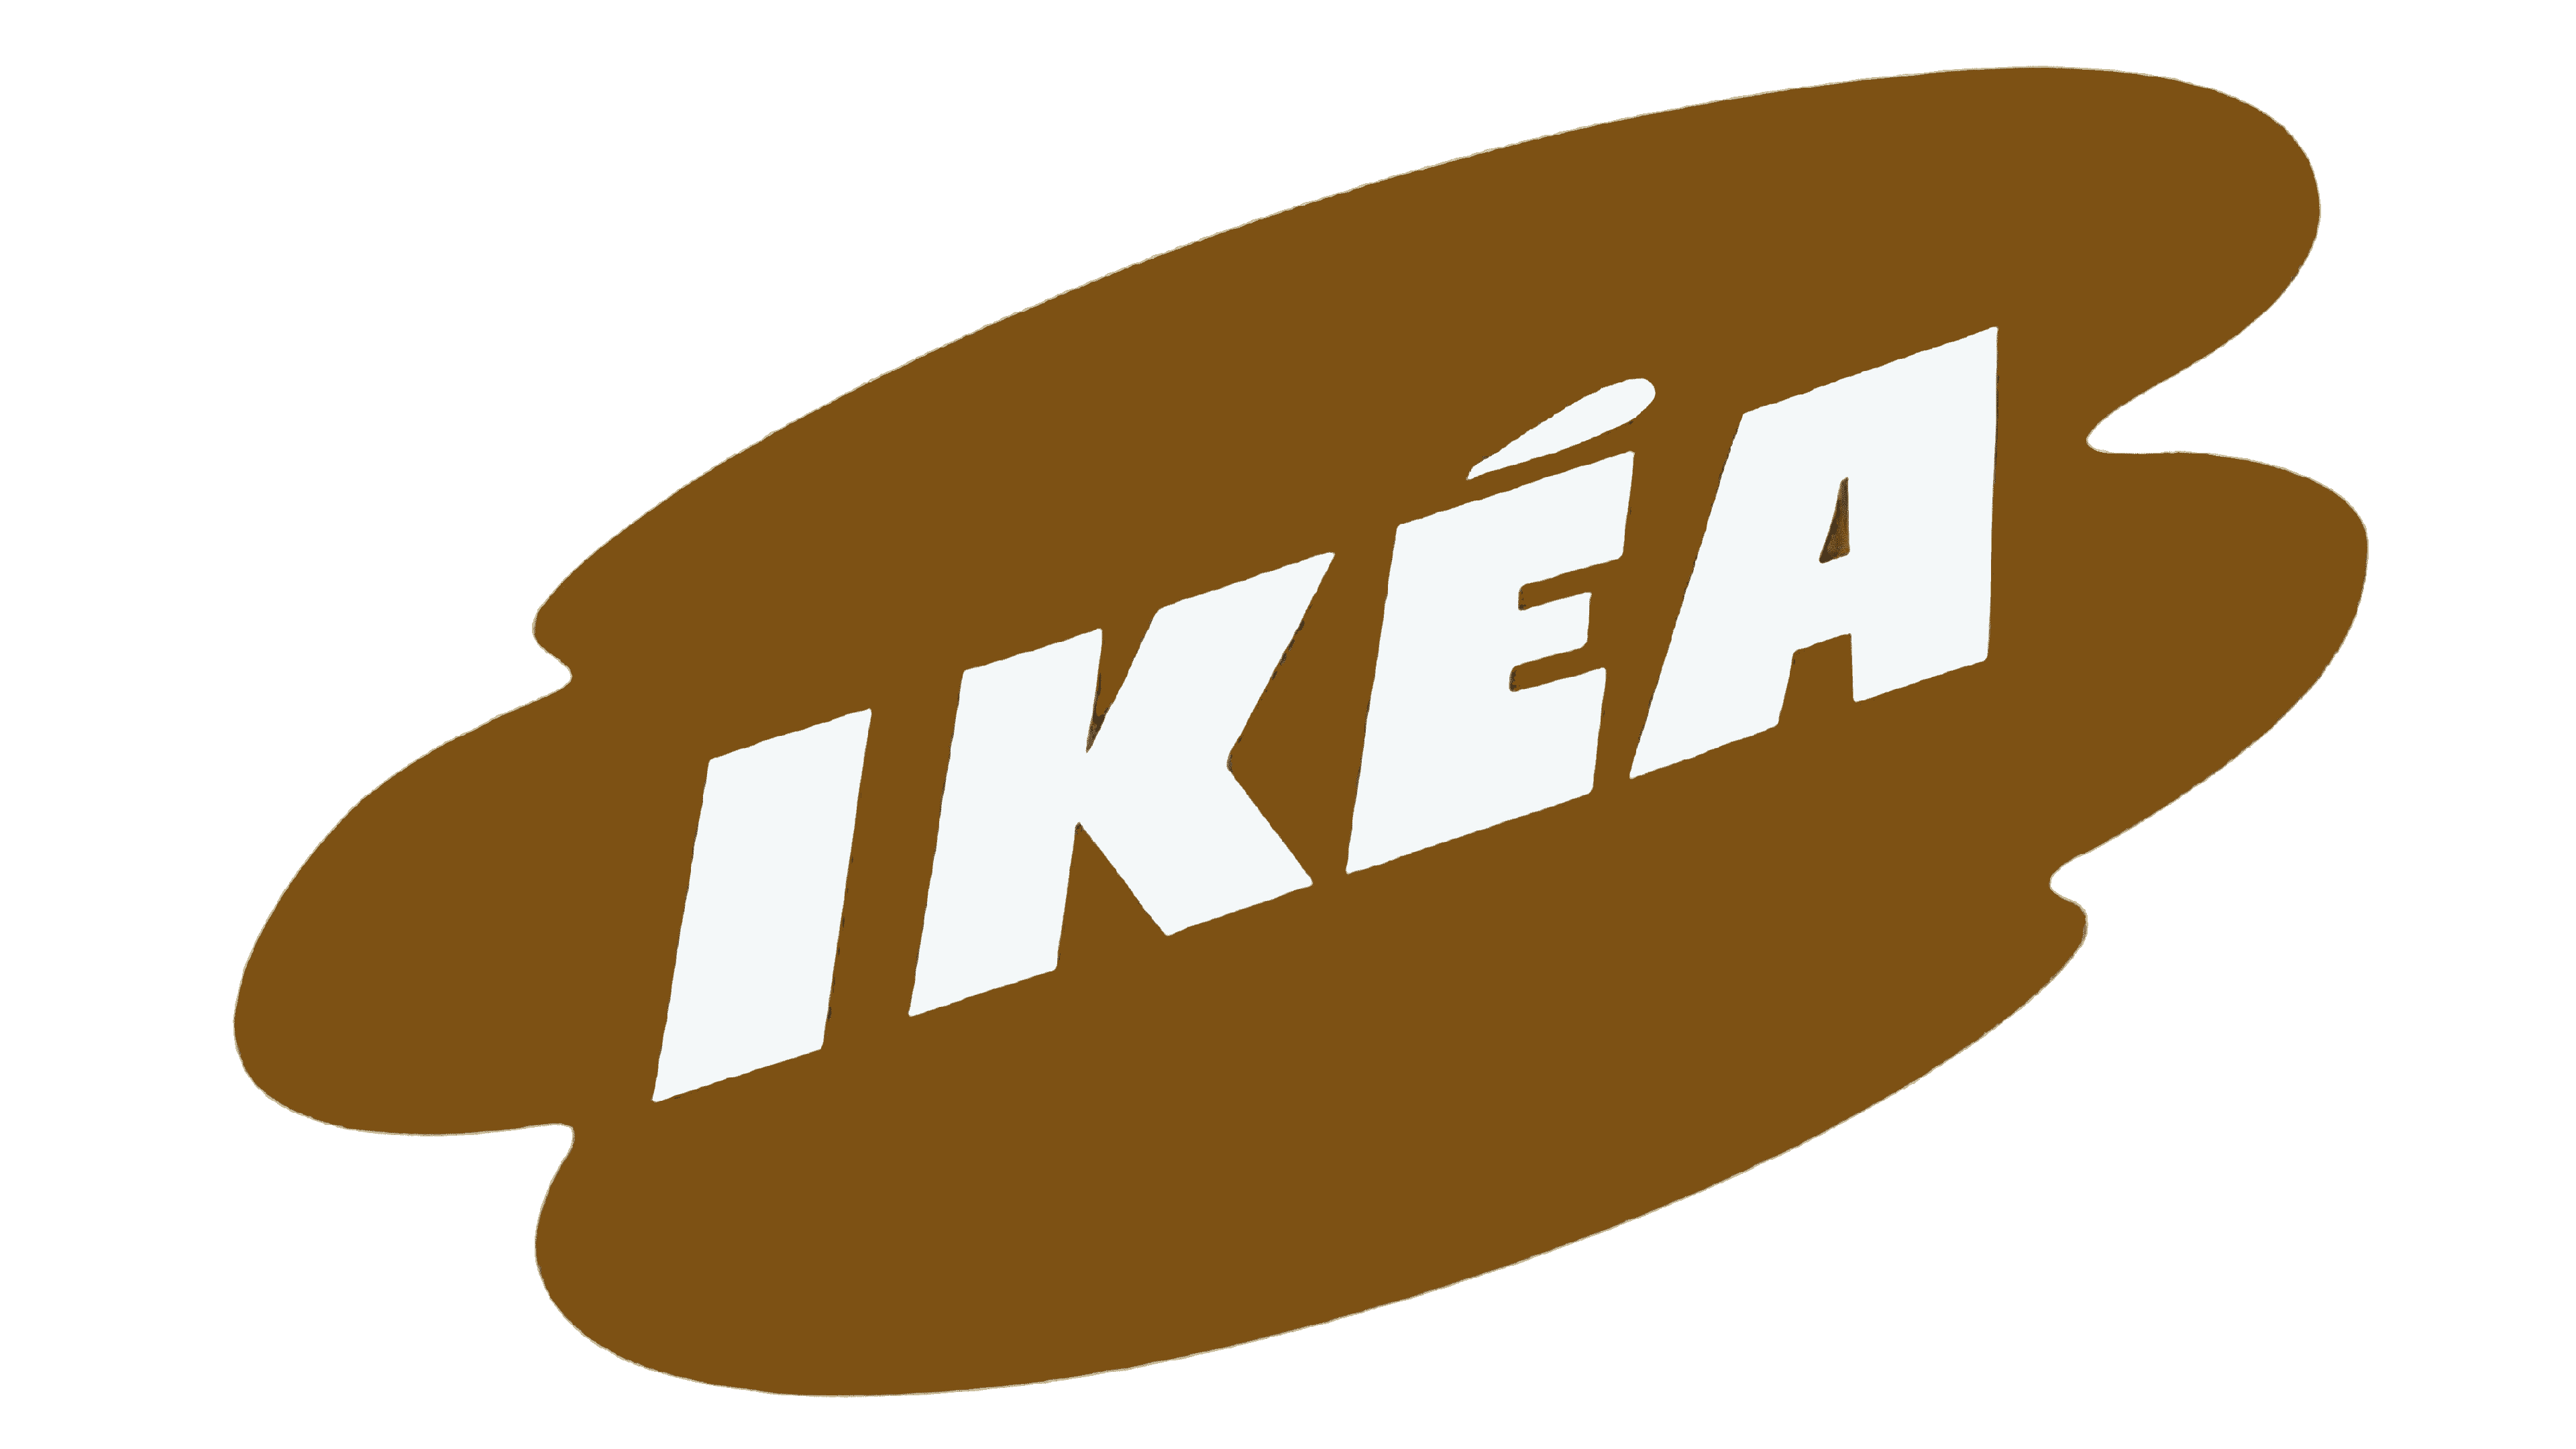 IKEA Logo and sign, new logo meaning and history, PNG, SVG